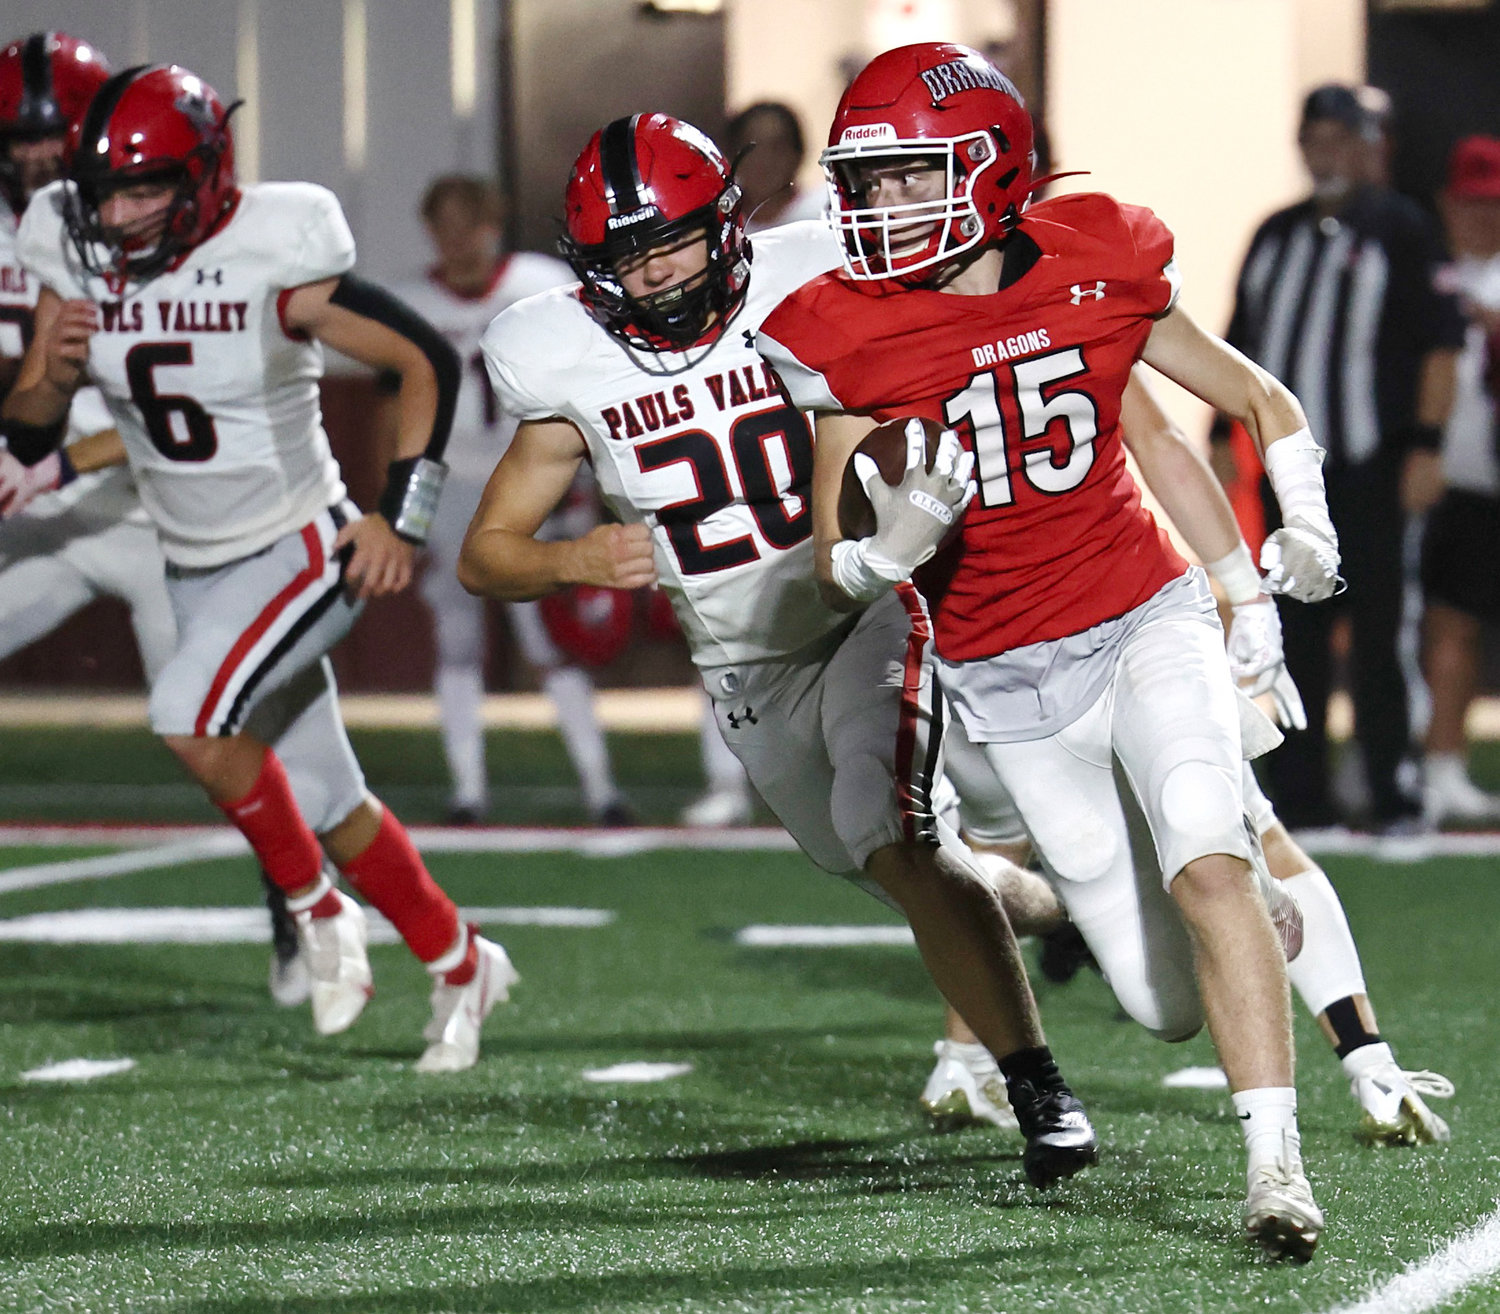 Purcell sophomore Devan Martin runs with the ball Friday night on Conger Field during Purcell’s game against Pauls Valley. The Dragons lost 45-27.